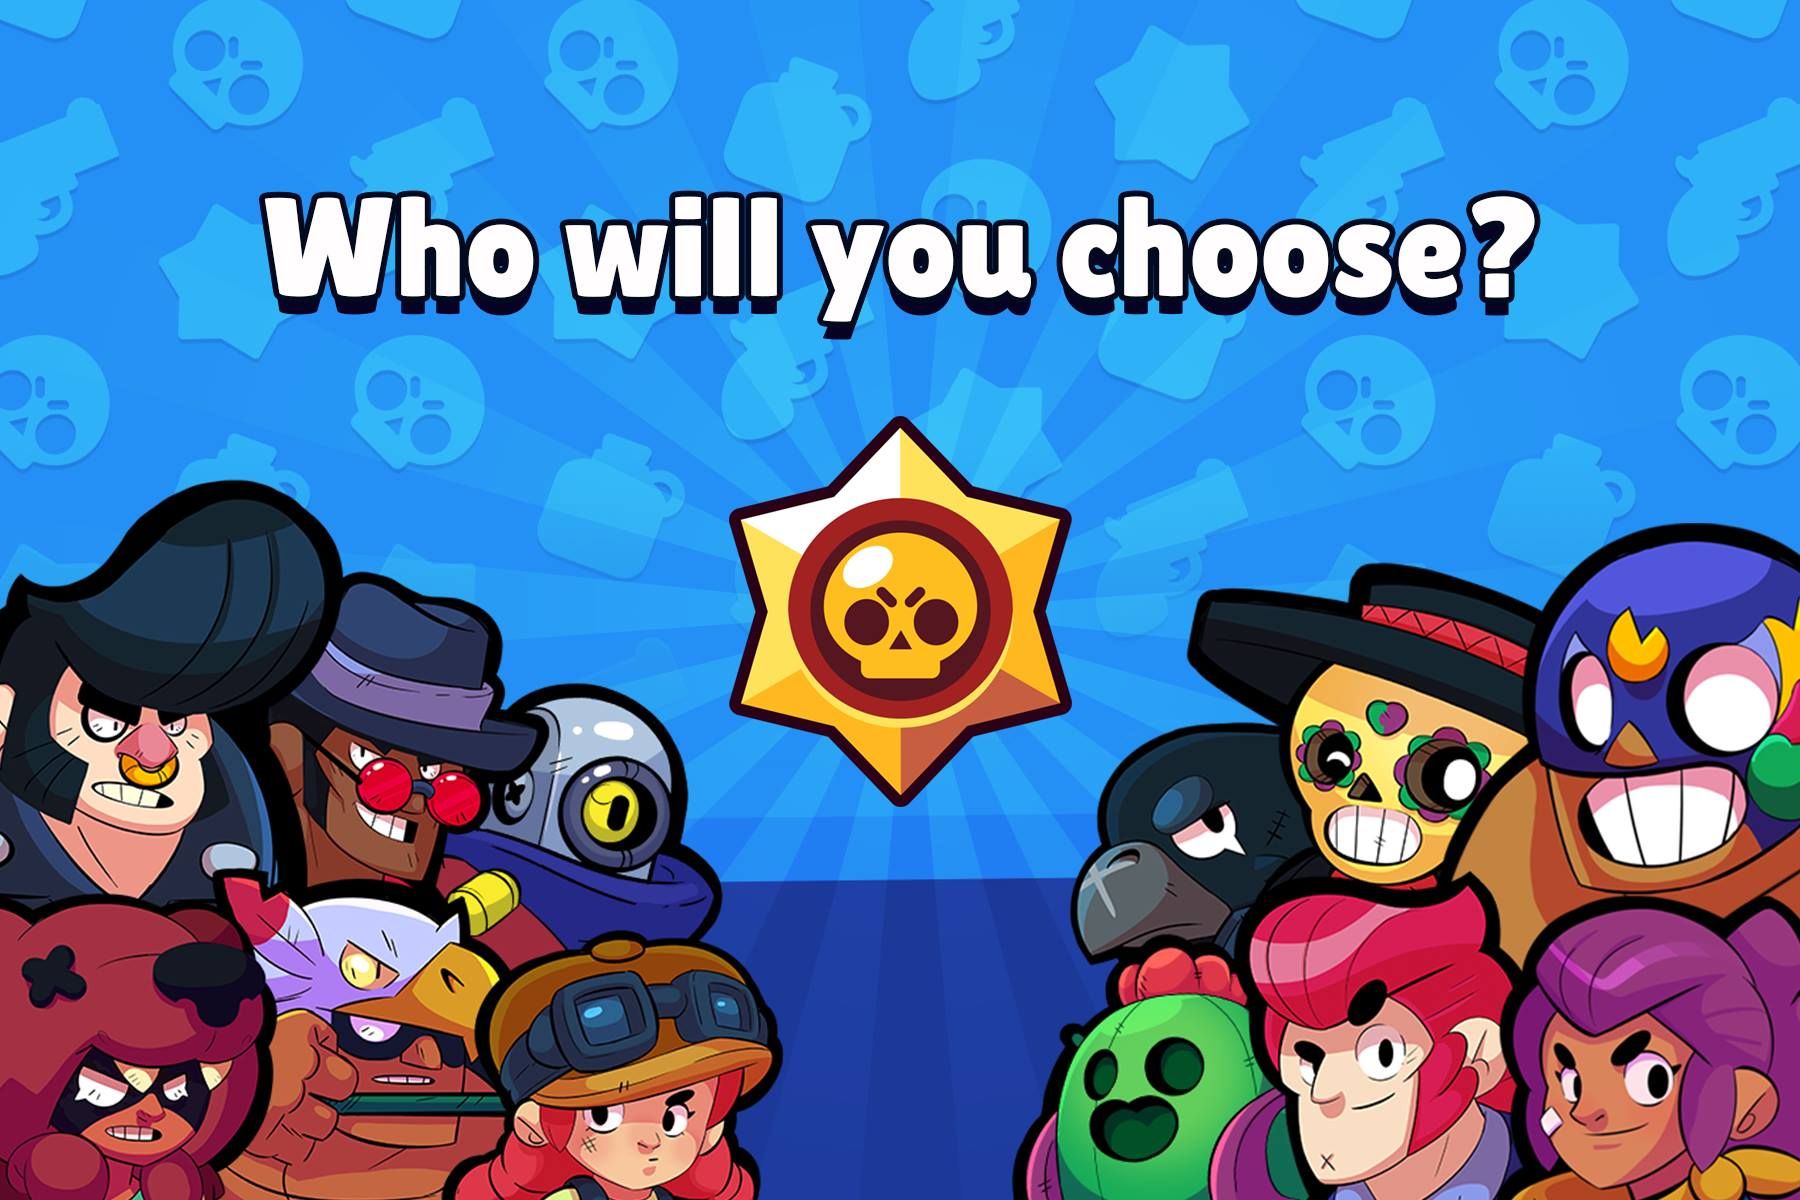 Clash Of Clans Developer Supercell Reveals New Game Brawl Stars